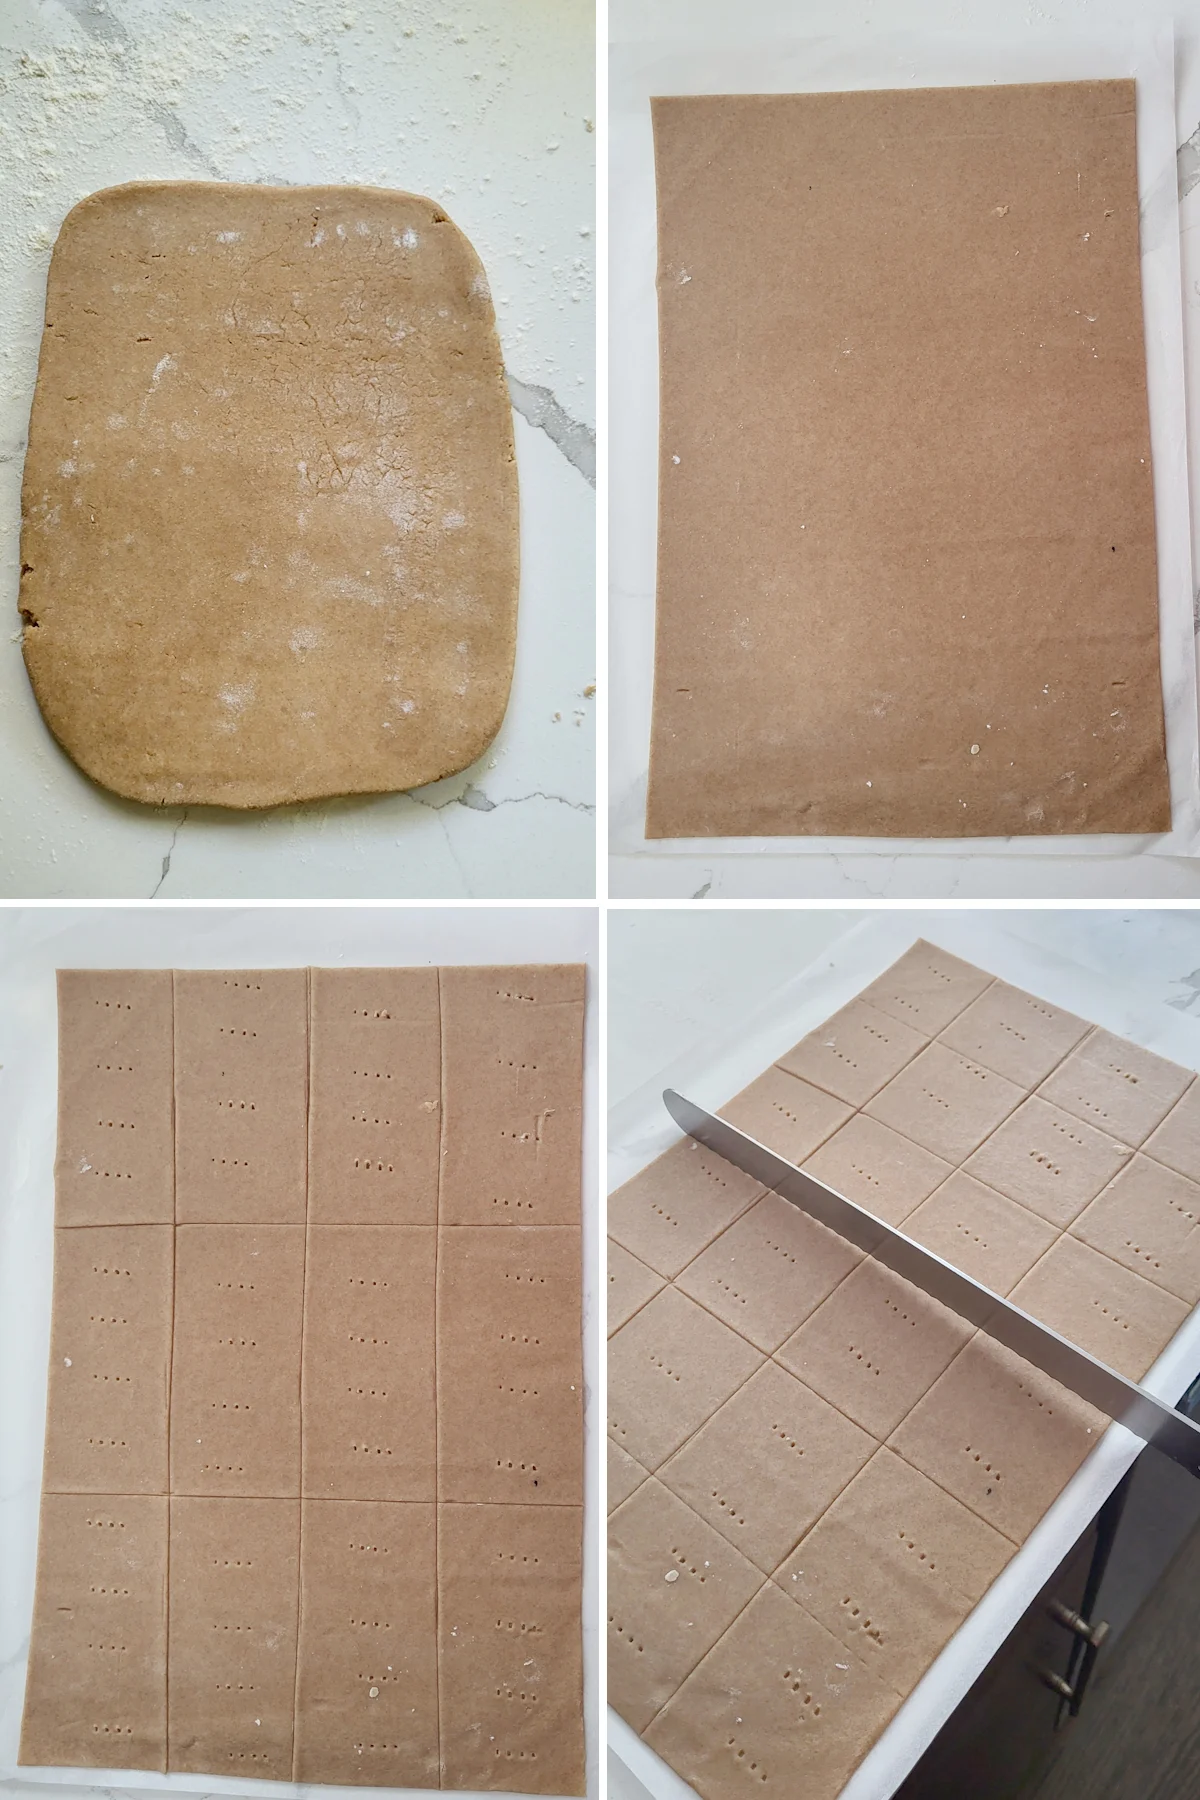 showing four steps to roll and cut graham crackers.